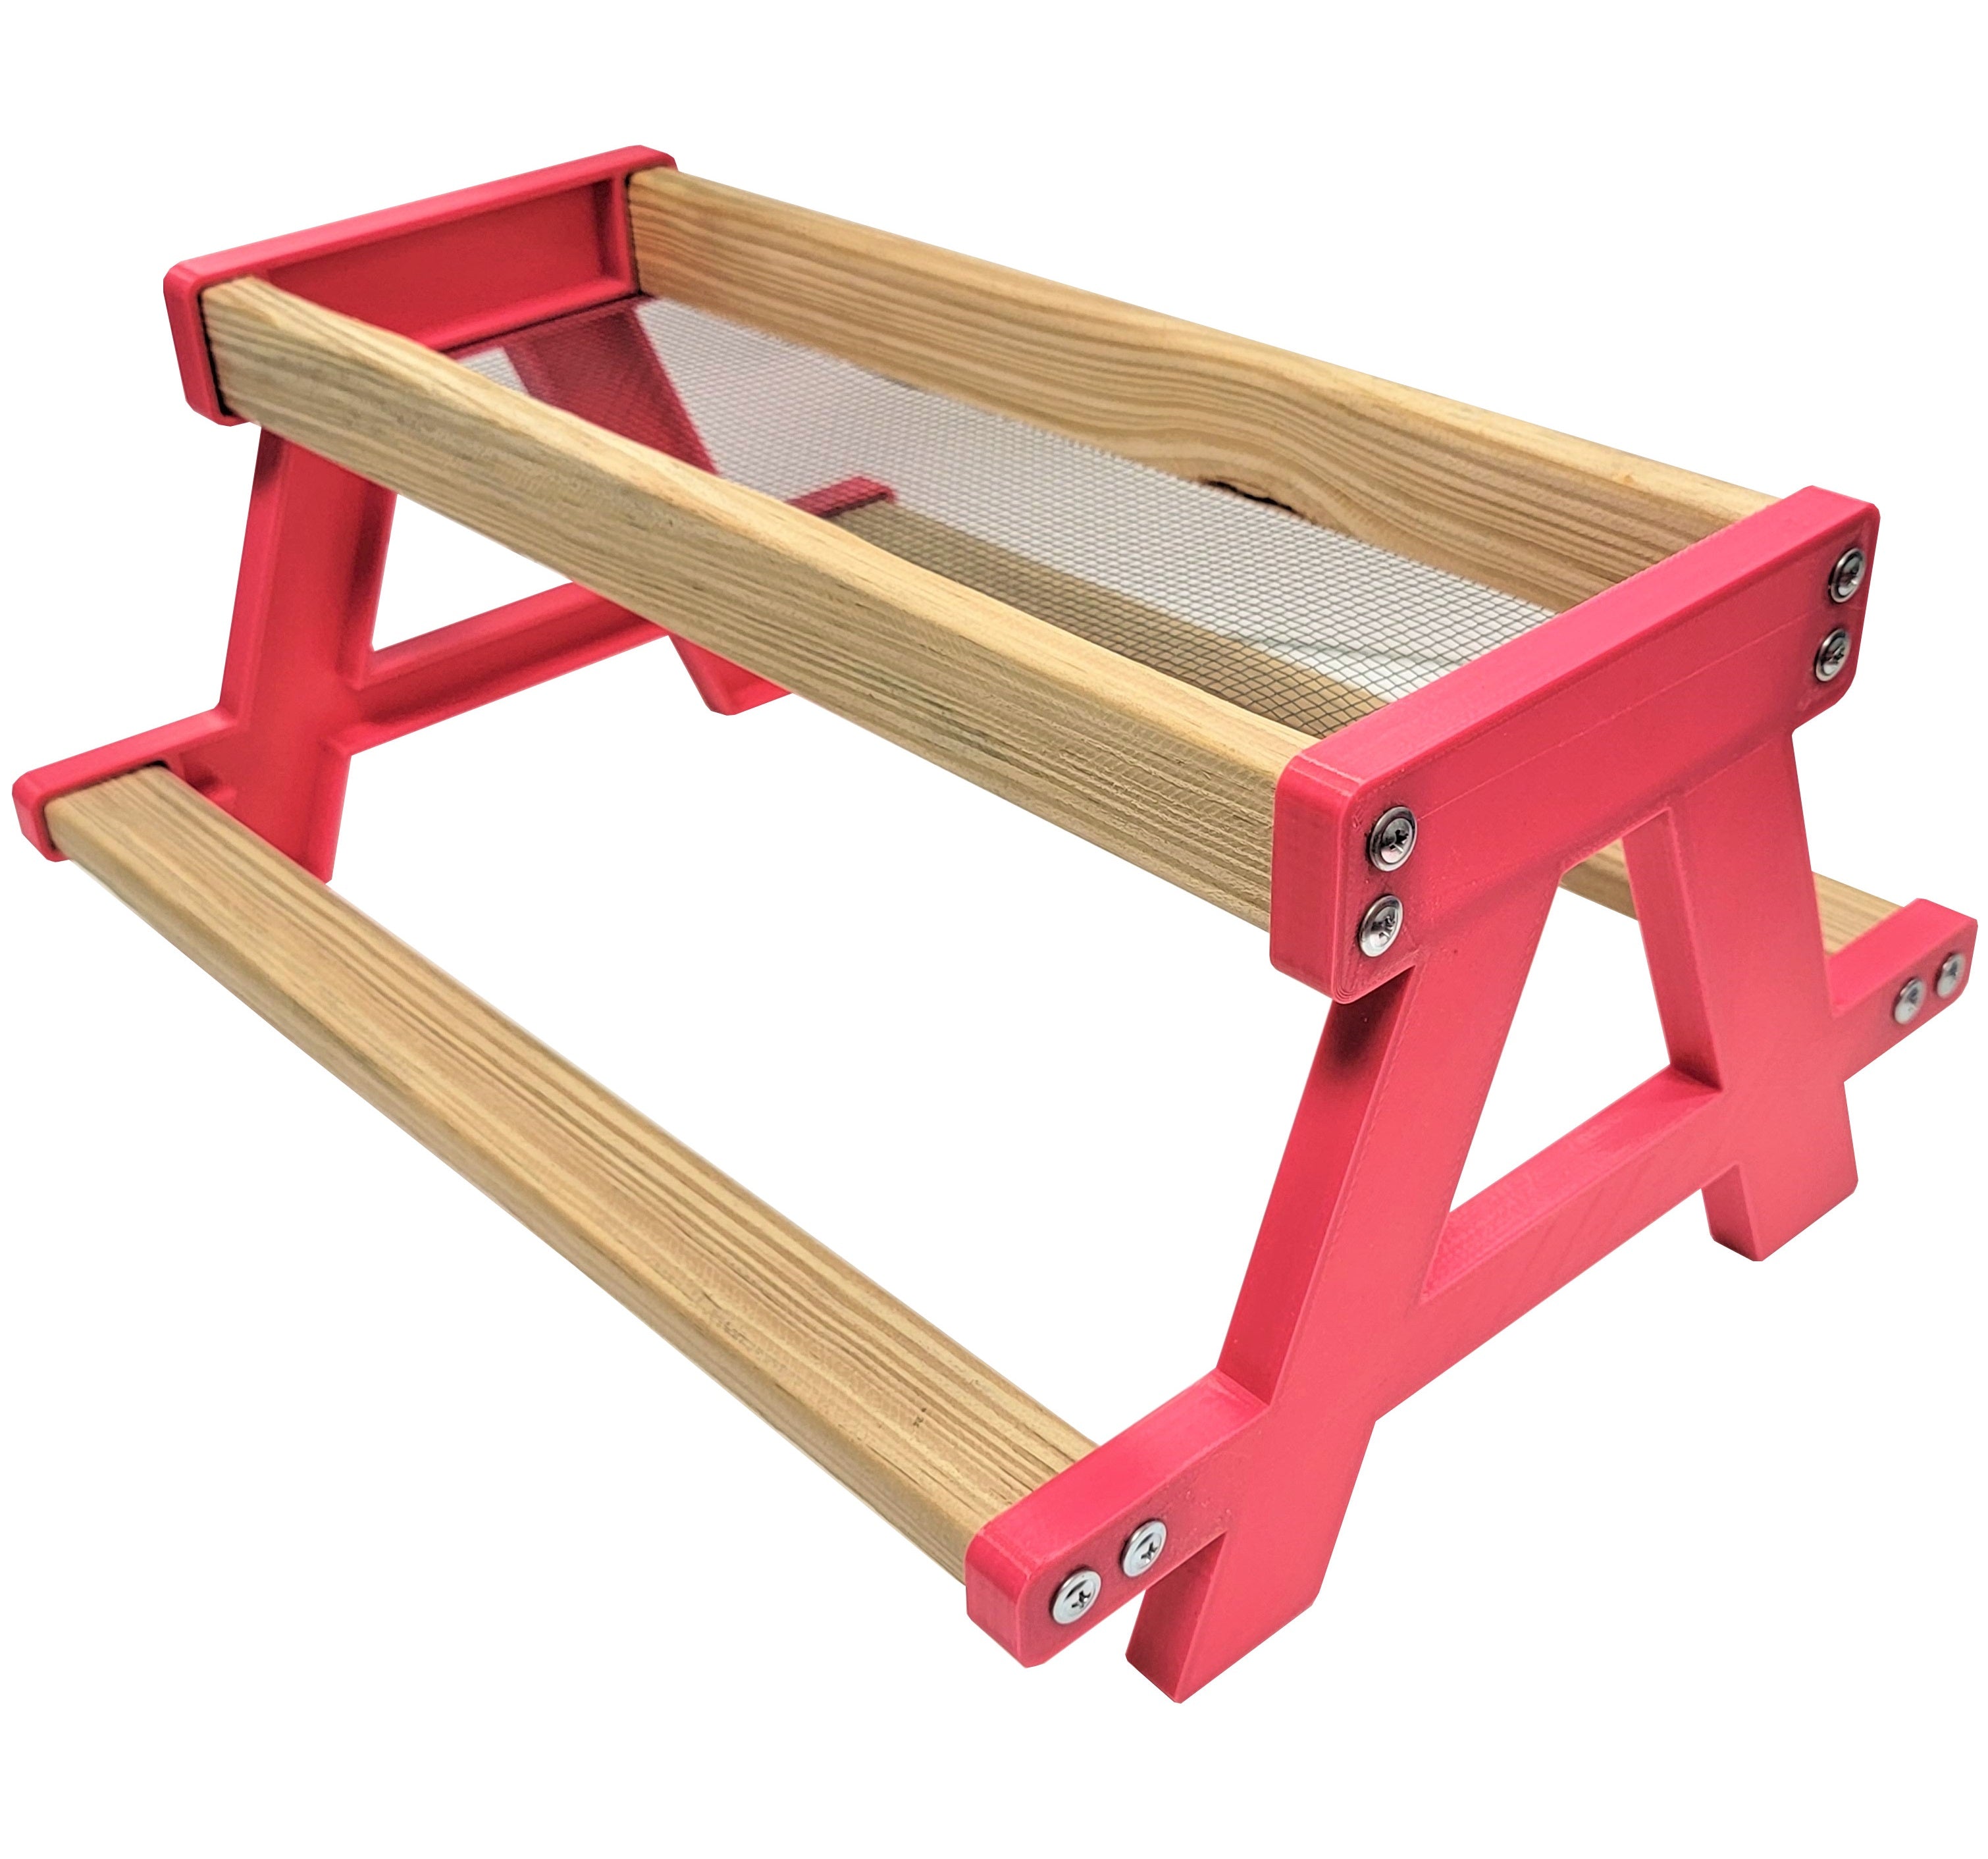 16 Inch Long Pink Chicken Picnic Table Chicknic Treat Feeder Bench